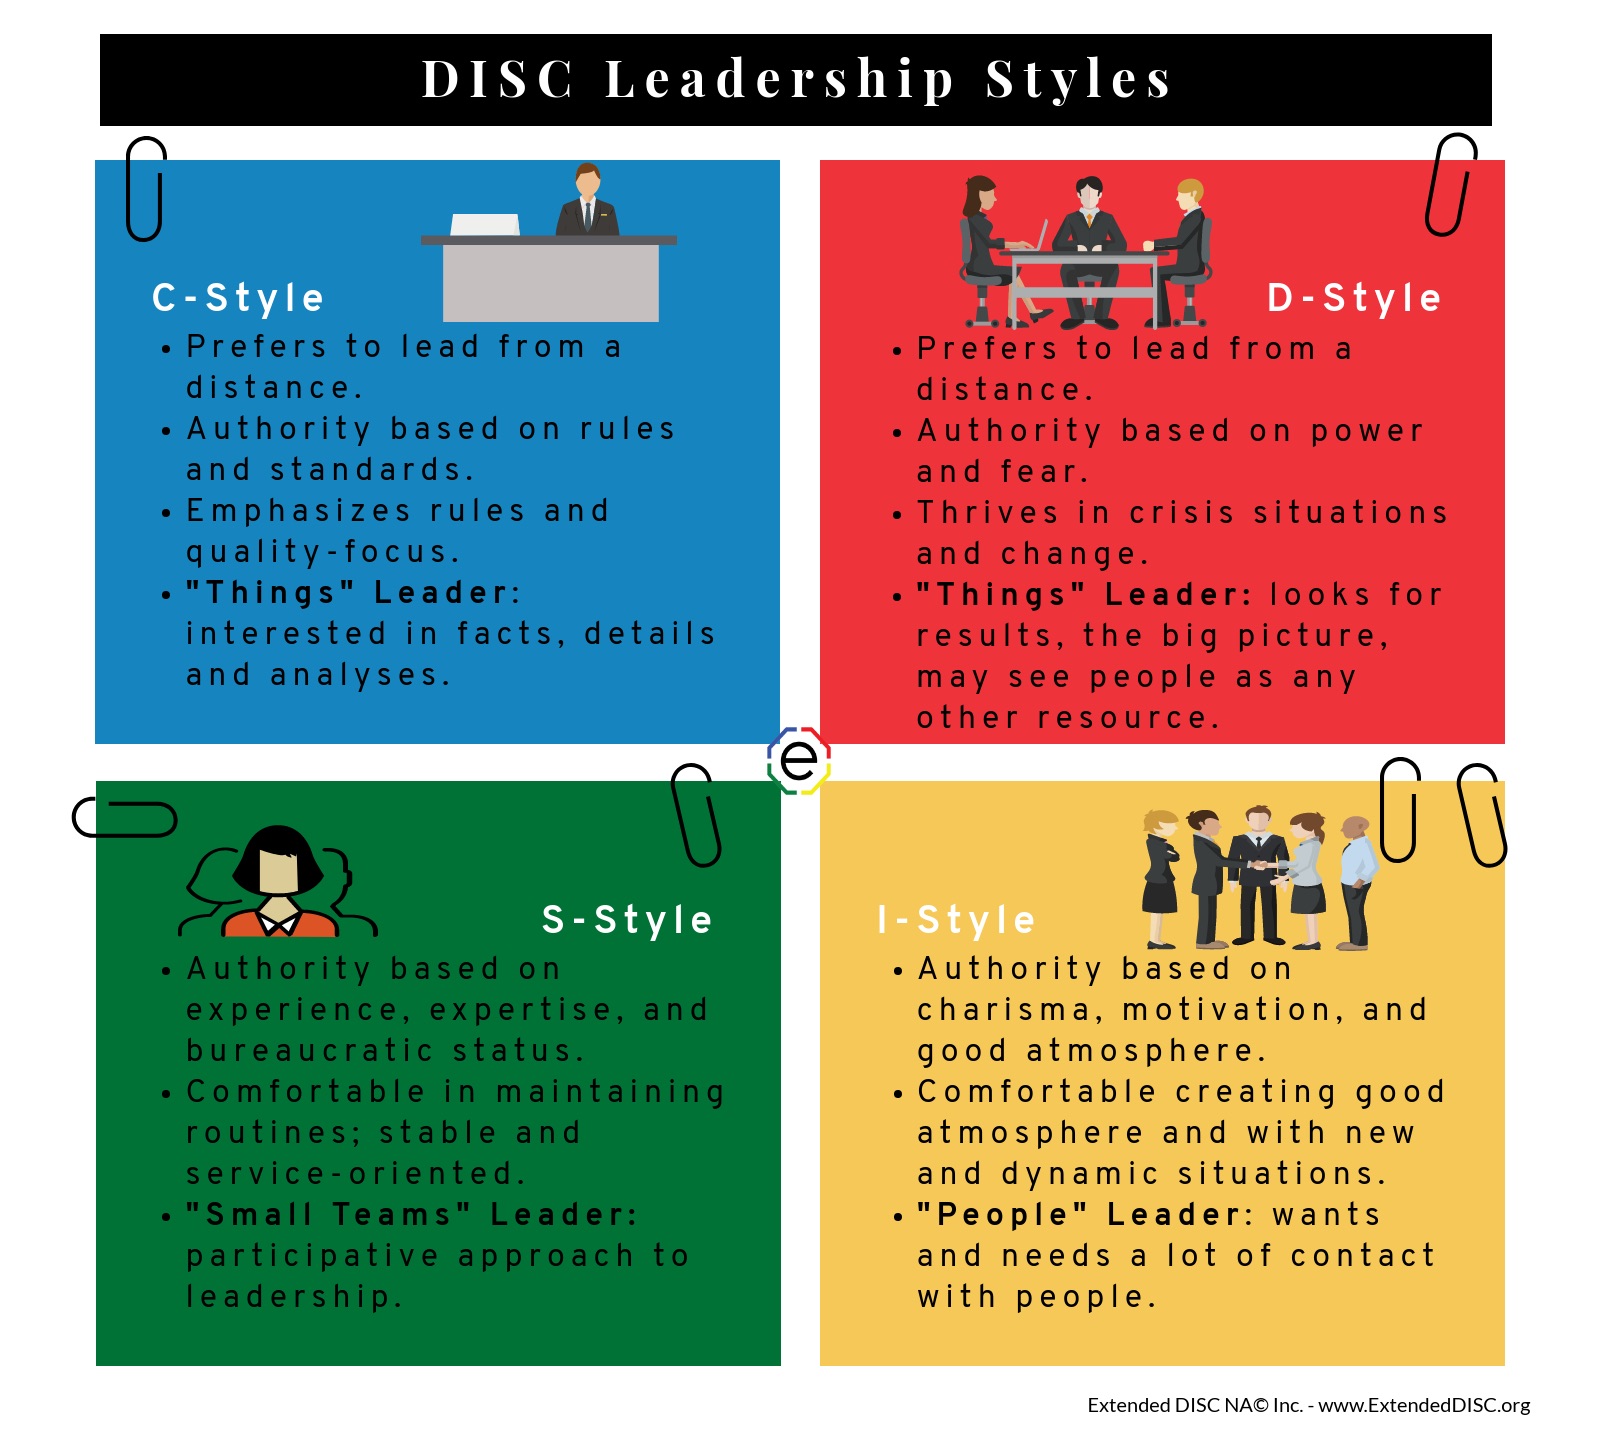 Do You Have the Right Leadership Style?